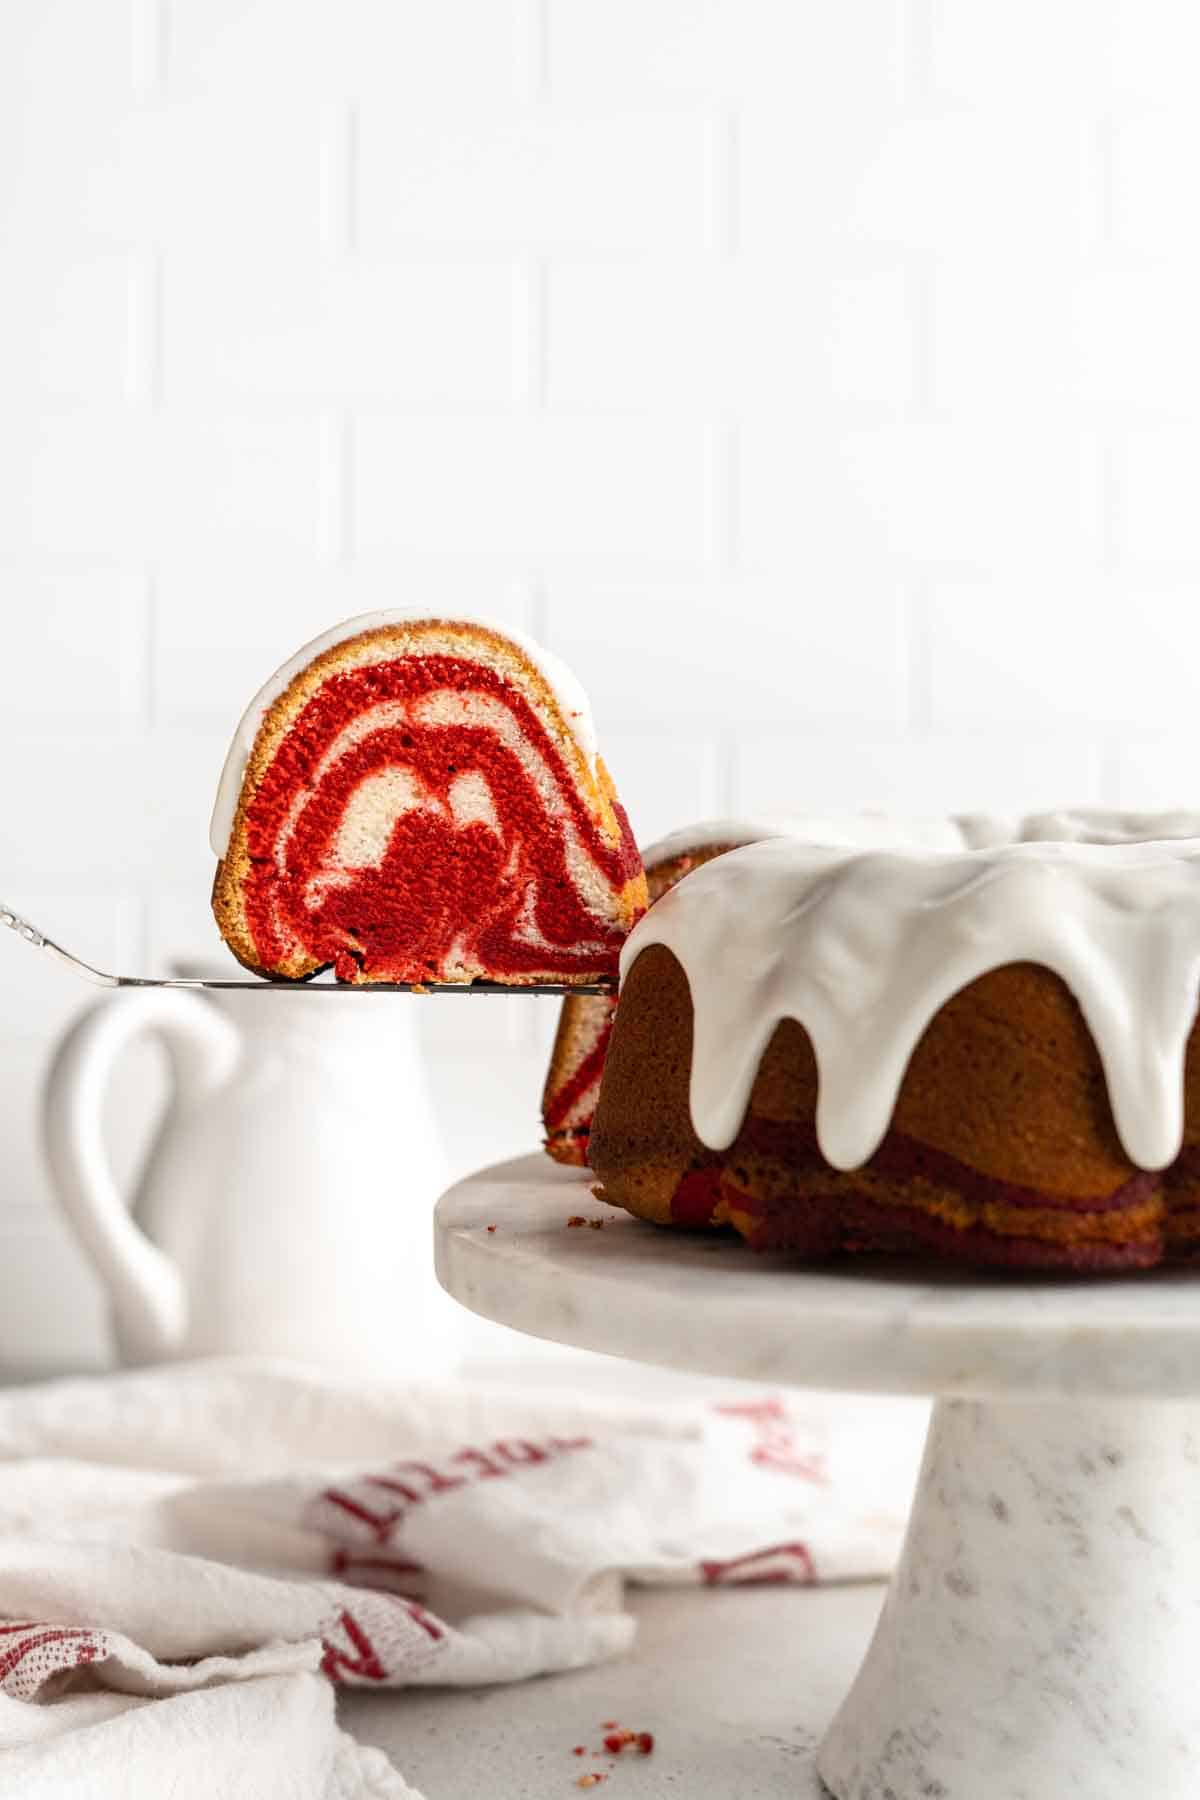 Red Velvet Marble Cake is sliced on white cake stand with white background with a spatula lifting a piece of cake up to show the swirl pattern.